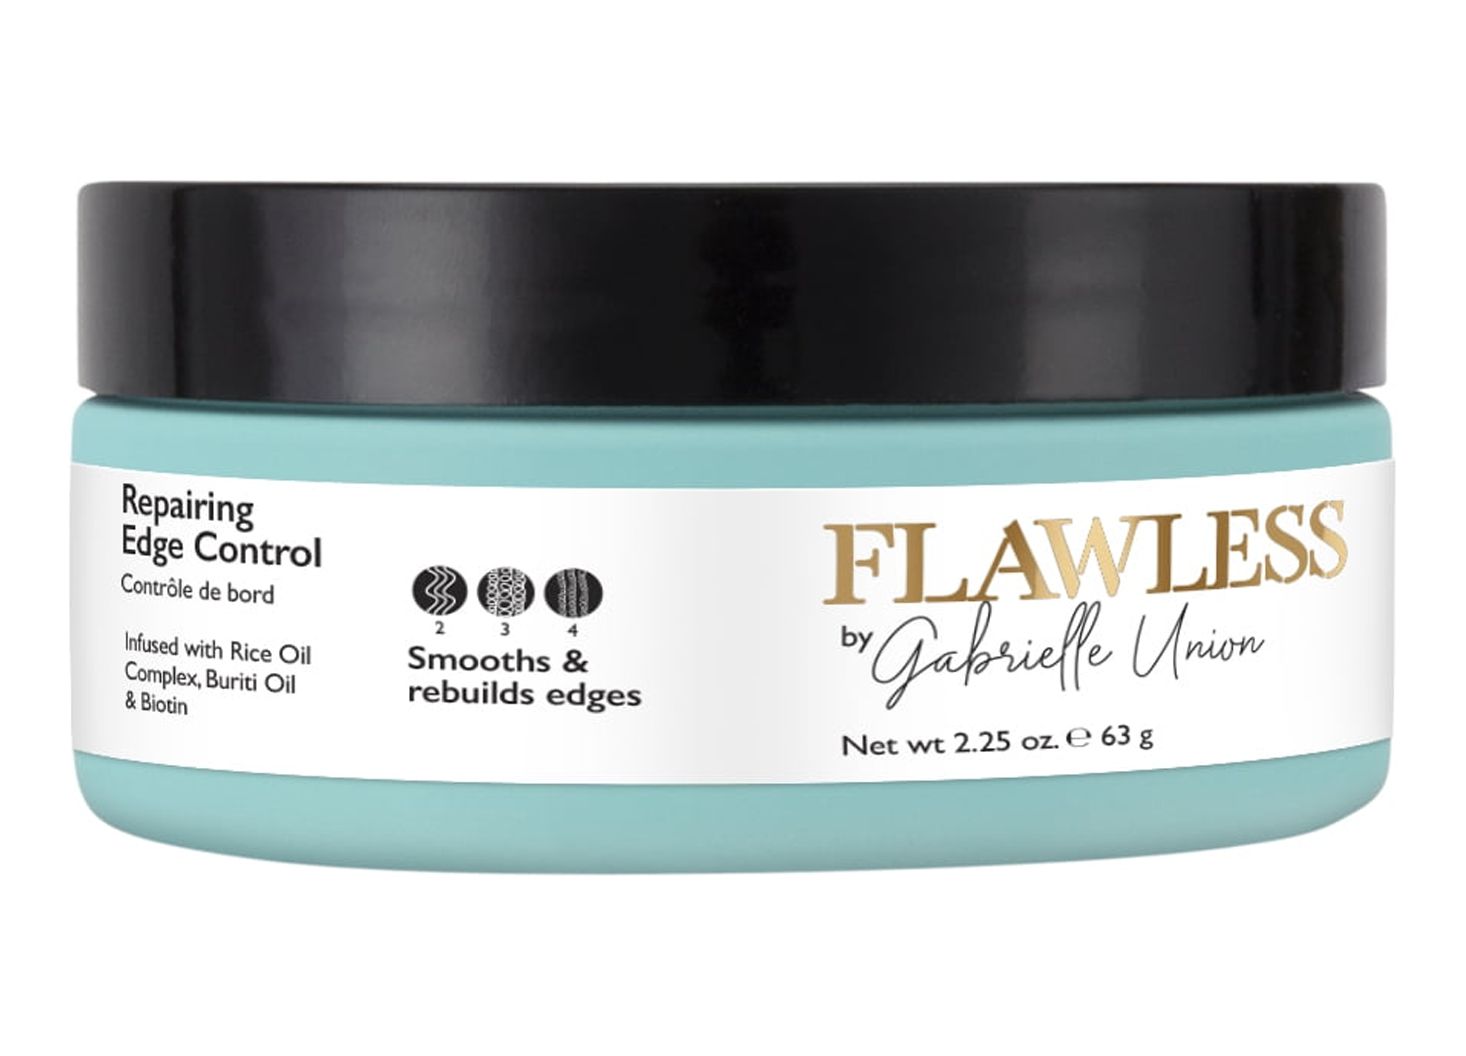 Flawless by Gabrielle Union Edge Control Hair Styling Cream, 2.25 OZ - image 1 of 7